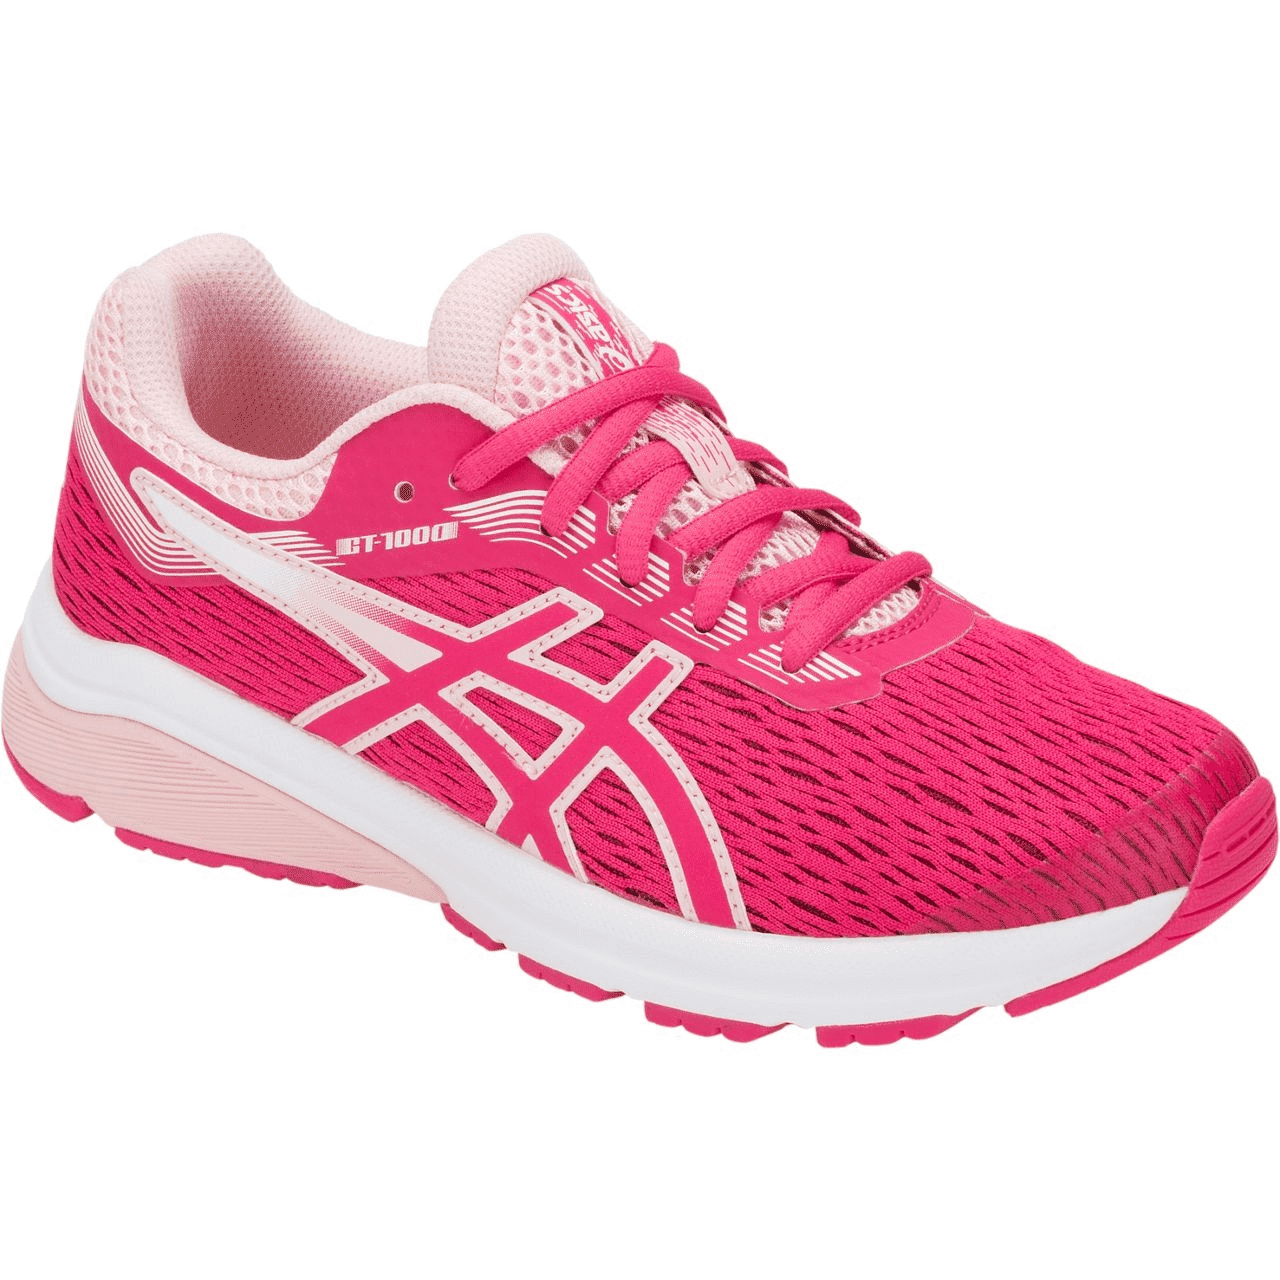 ASICS GT-1000 7 GS Running Shoe in Pink/Frosted Rose - Model 1014A005 in Kids Size 6 - Walmart.com